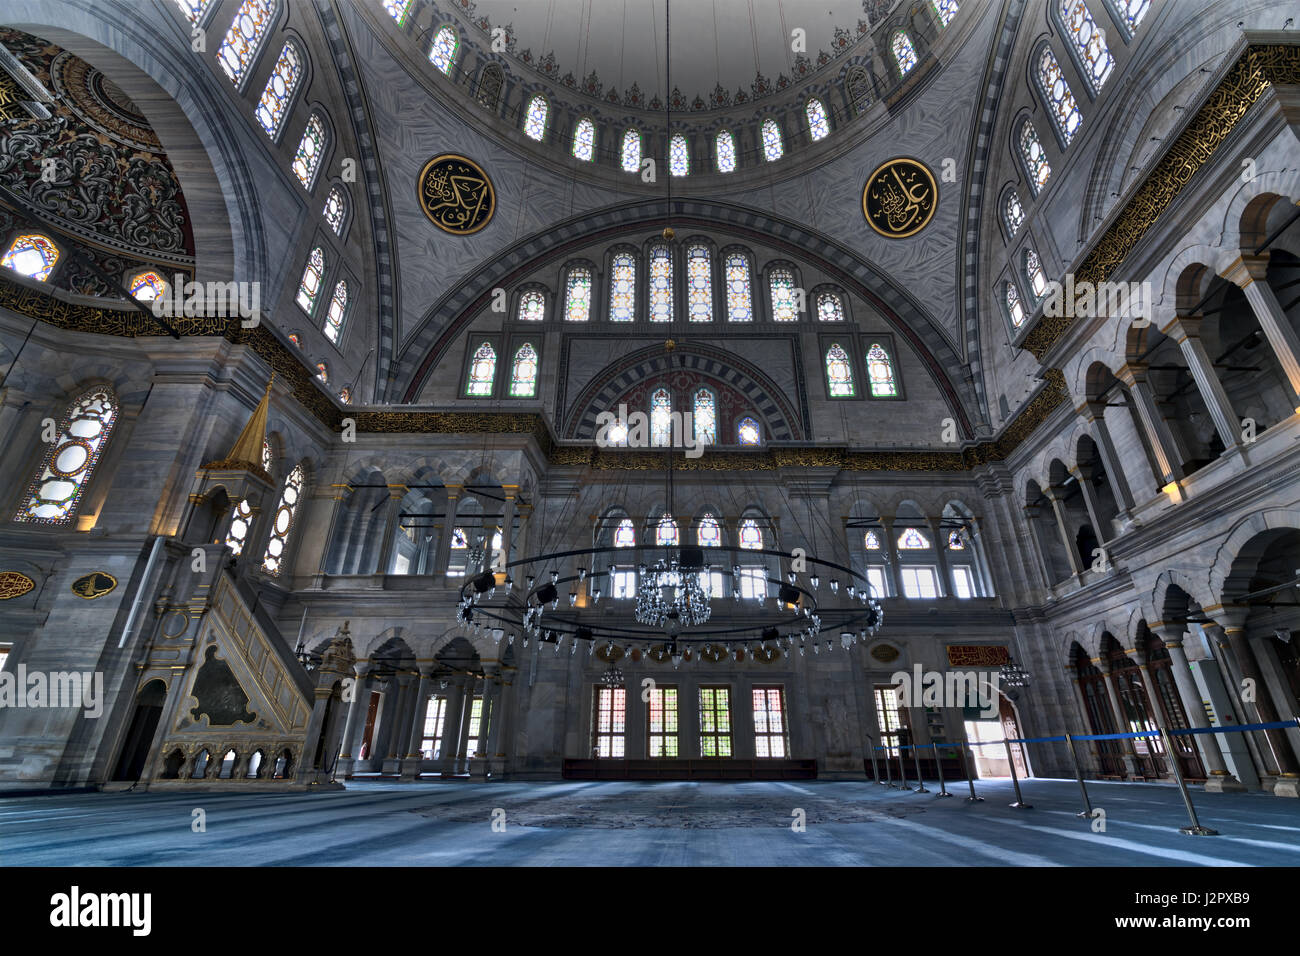 Interior of Nuruosmaniye Mosque, an Ottoman Baroque style mosque completed in 1755, with a huge dome & many colored stained glass windows located in S Stock Photo